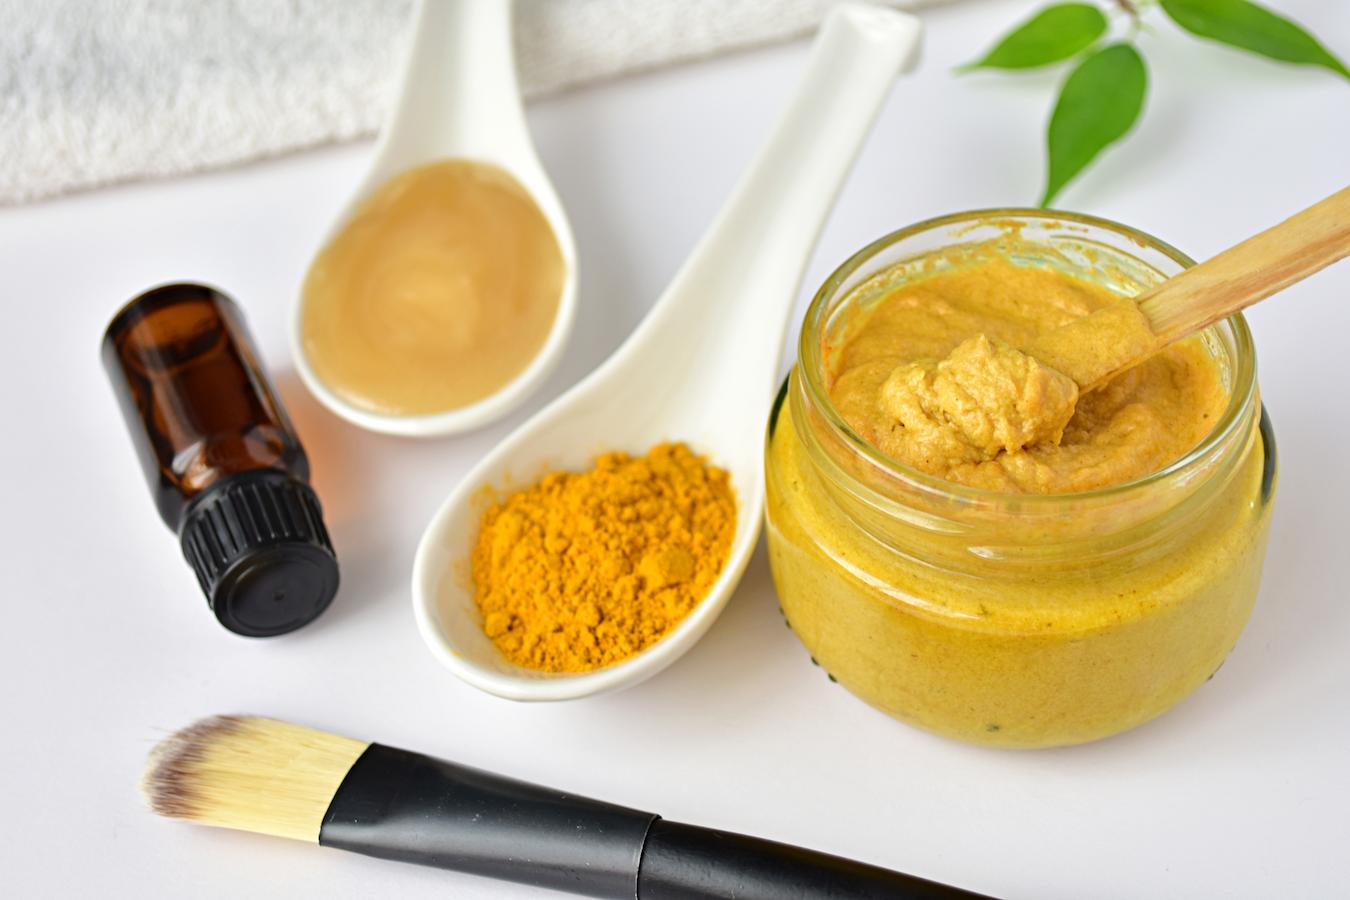 Use ground turmeric powder or turmeric face mask for its anti inflammatory compounds